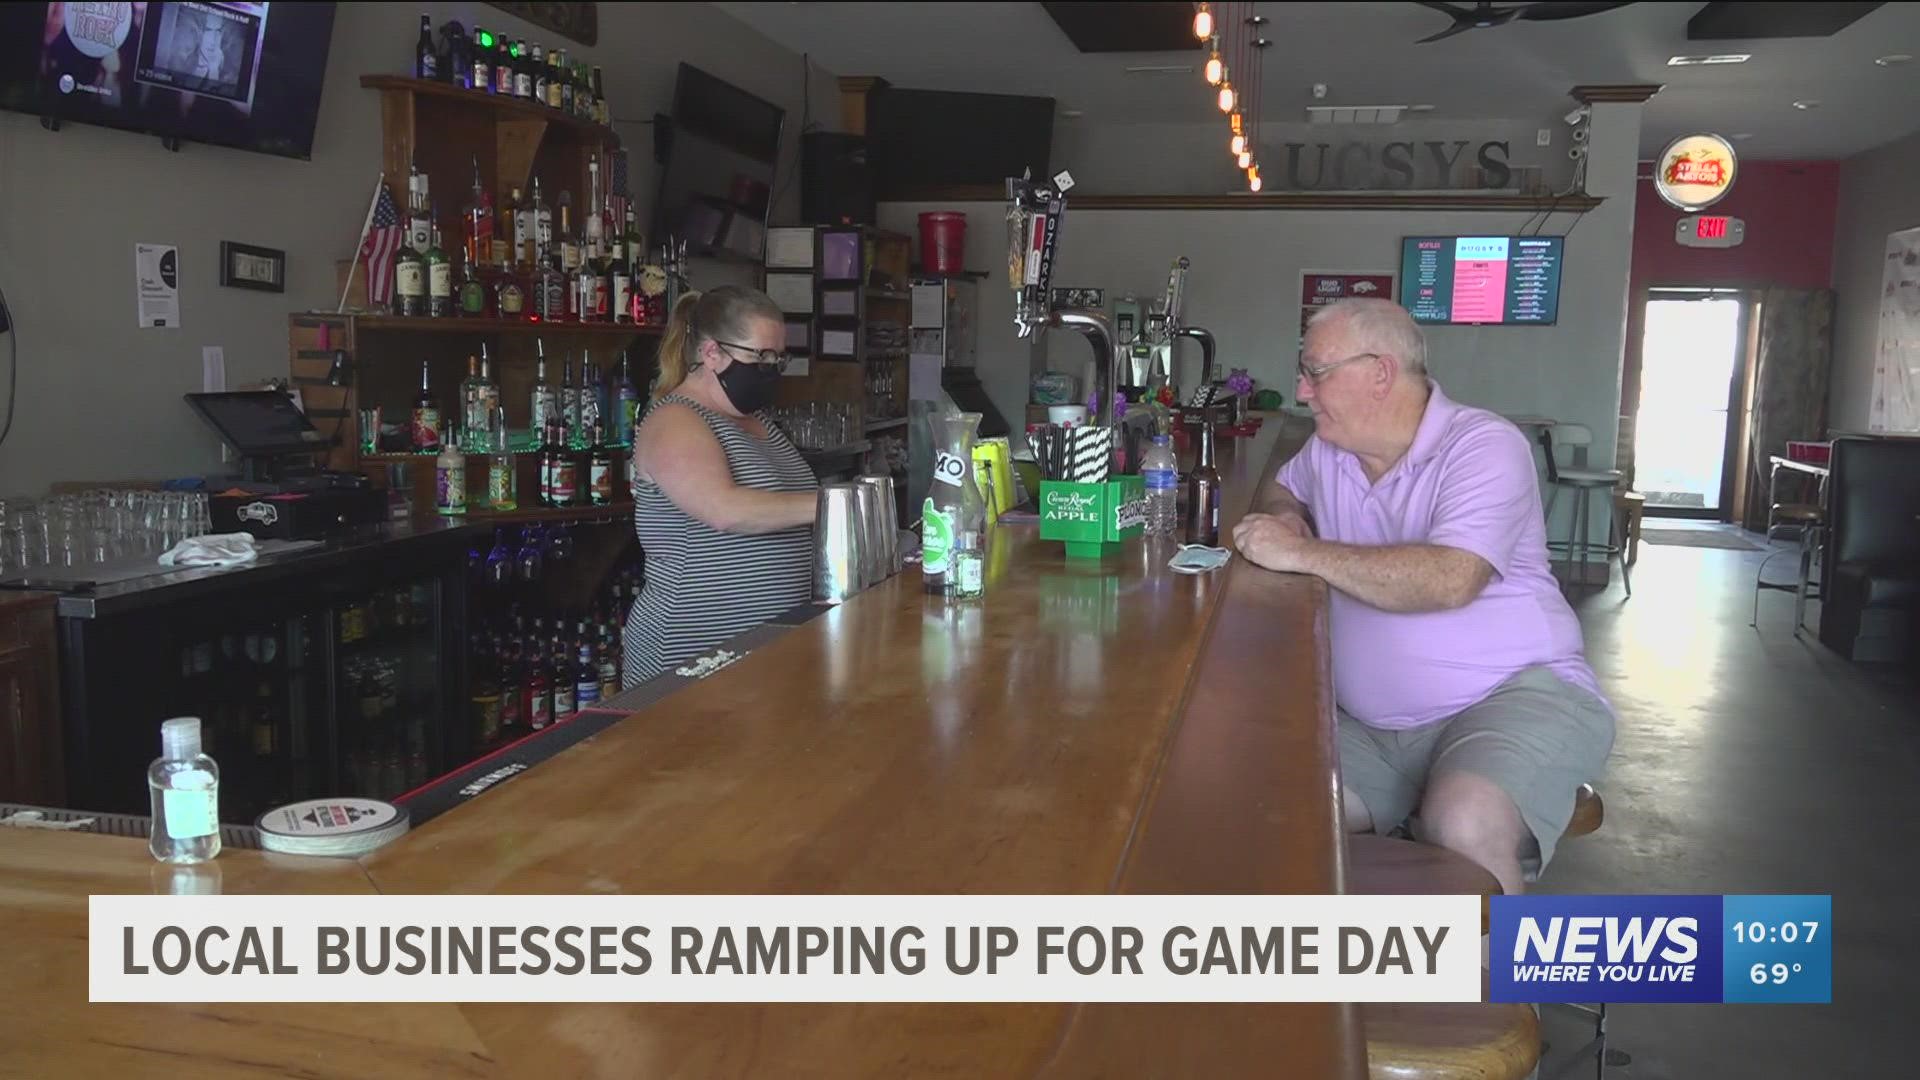 Local businesses are starting to recover with the help of Razorback football games after suffering pandemic losses over the past year and a half.